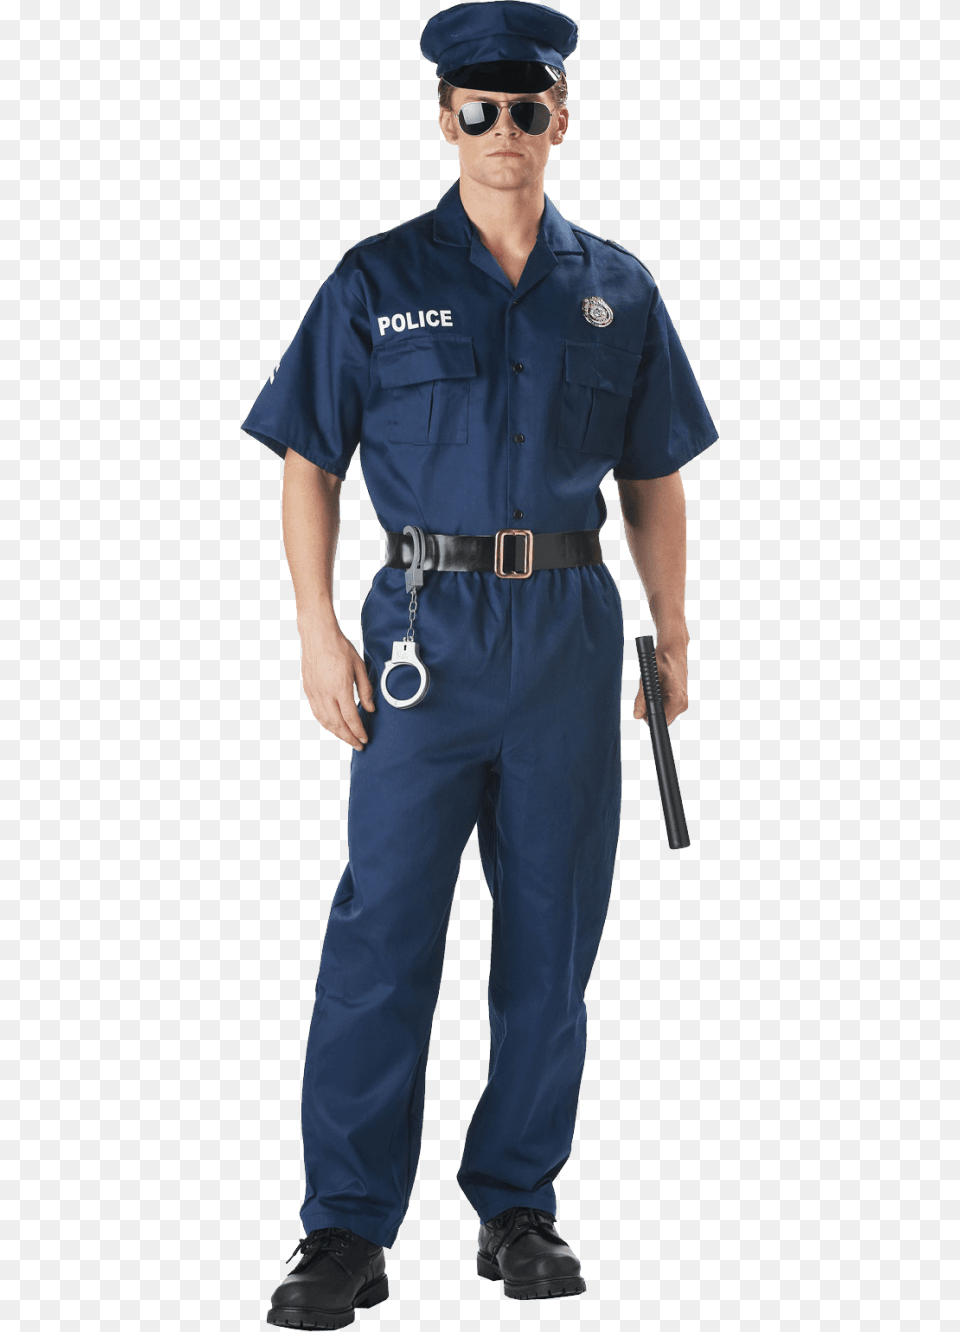 Policeman Images Transparent Adult Police Officer Costume Navy Blue S, Accessories, Belt, Male, Man Free Png Download